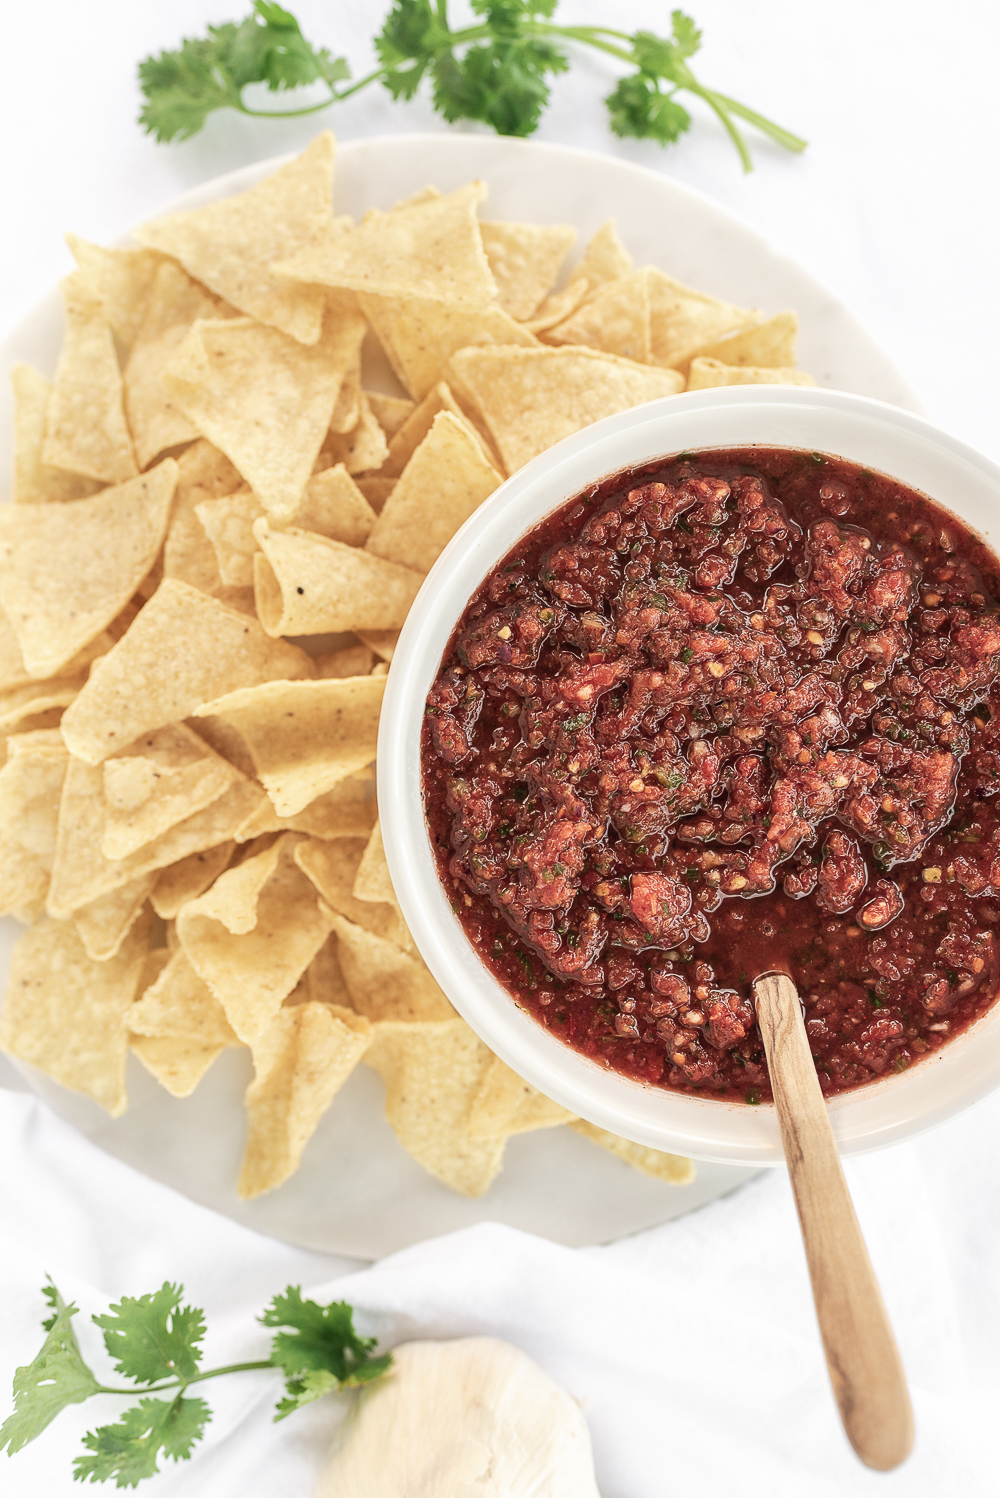 Homemade roma tomato fresh salsa with tortilla chips